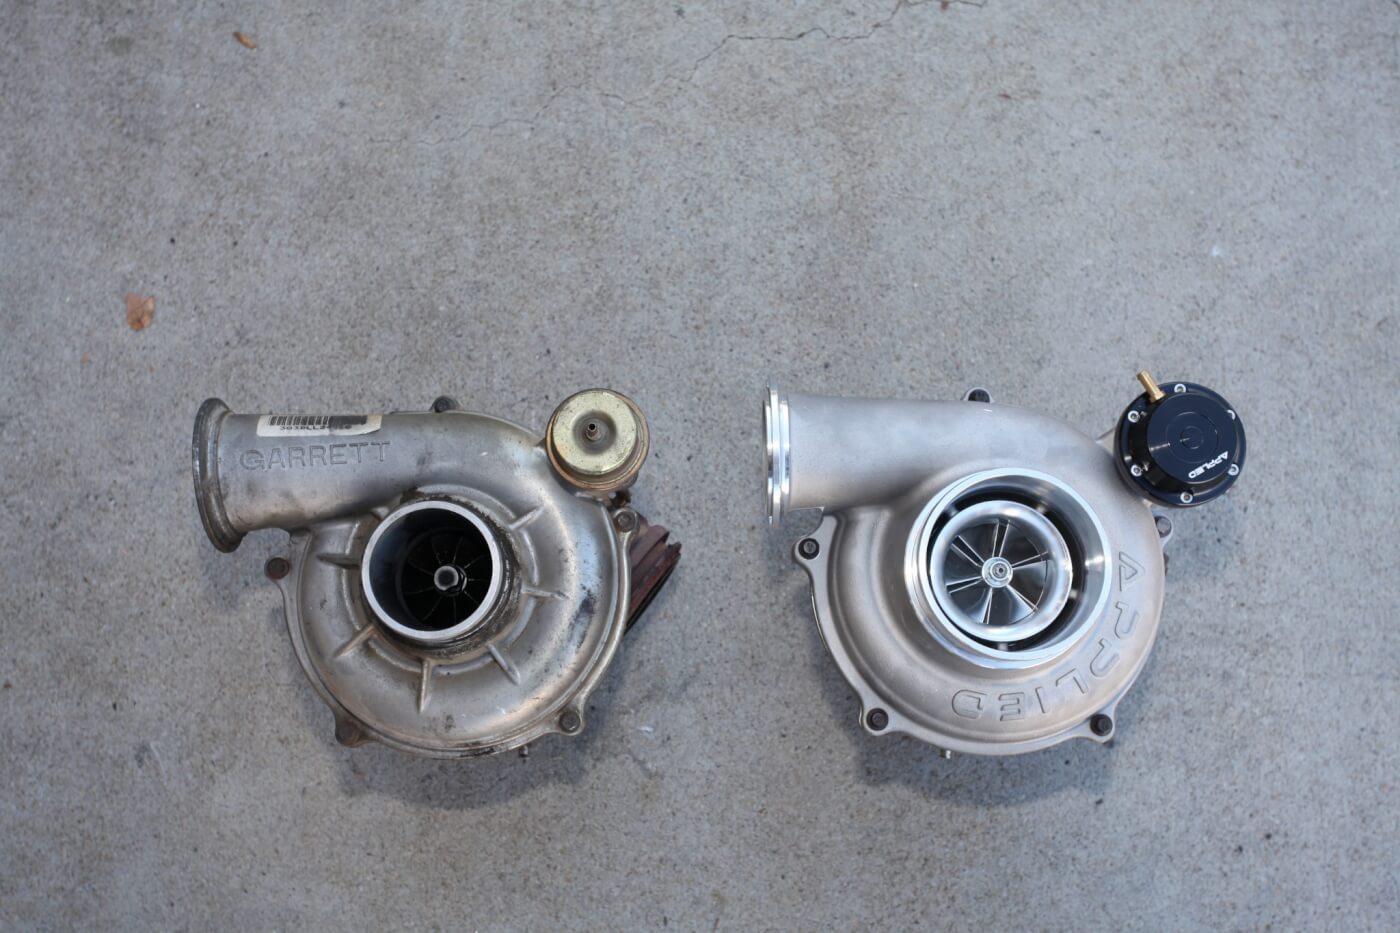 2A/2B. Here you see a comparison between the stock turbo (L) and the new Applied Performance Products turbo (R). The new turbo is almost the same size on the exterior for an easy fit, but the internals are built to move more air. Notice the new Applied Performance wastegate actuator. This billet aluminum heavy-duty adjustable wastegate actuator is pre-set at 24 psig. The wastegate actuator has a quick-adjust design, which eliminates the need to disconnect the actuator from the wastegate valve. It’s available separately and can be used on stock turbos. 